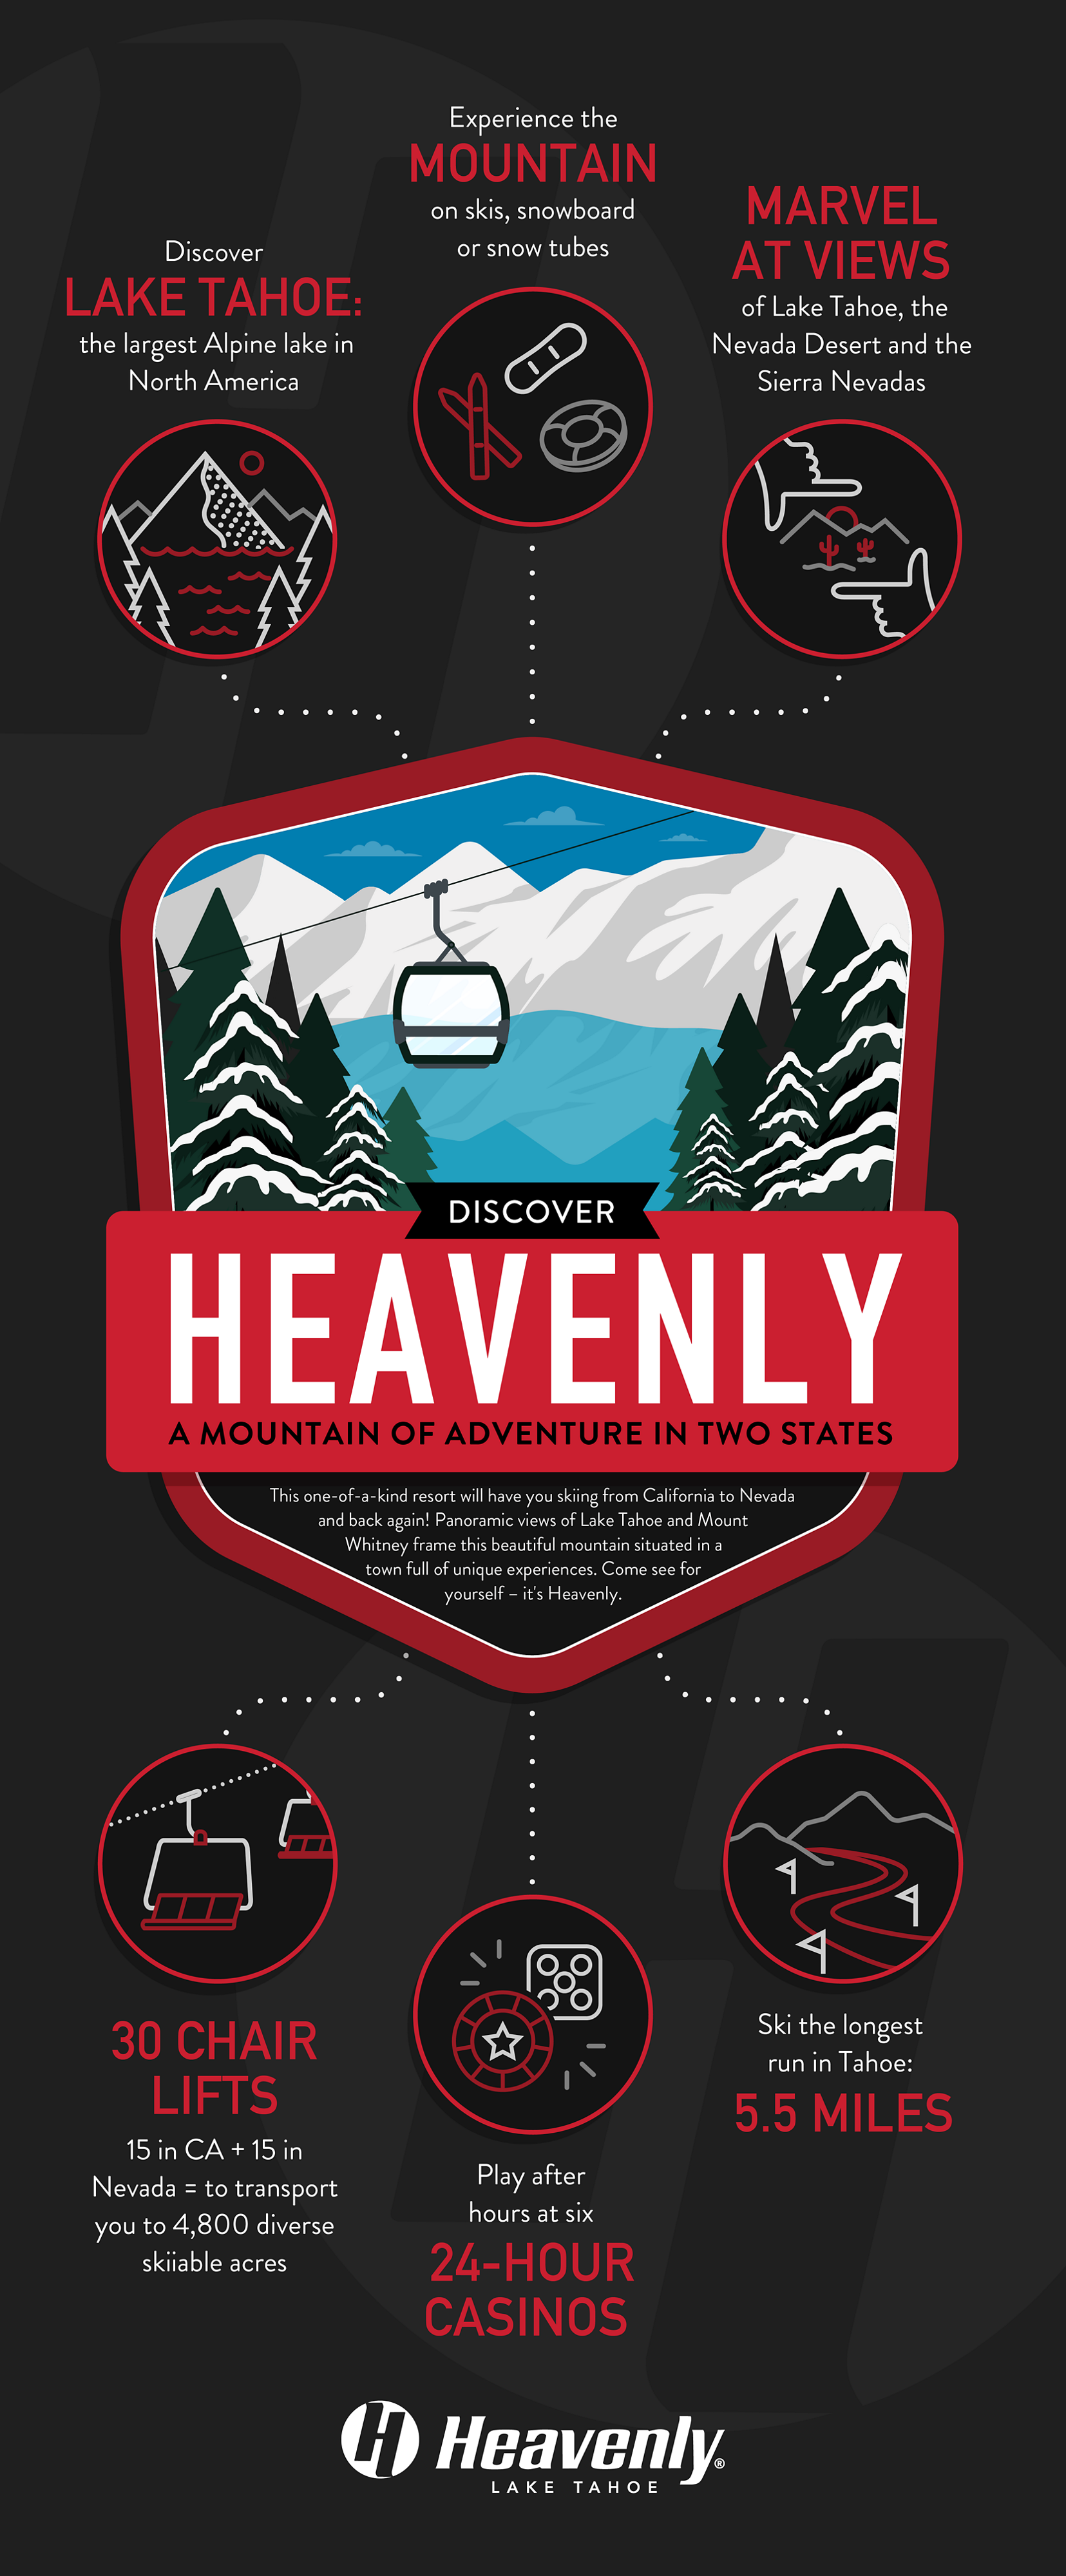 An infographic about Heavnly Ski Resort featuring facts about Lake Tahoe, 30 chair lifts and the longest run in Tahoe.